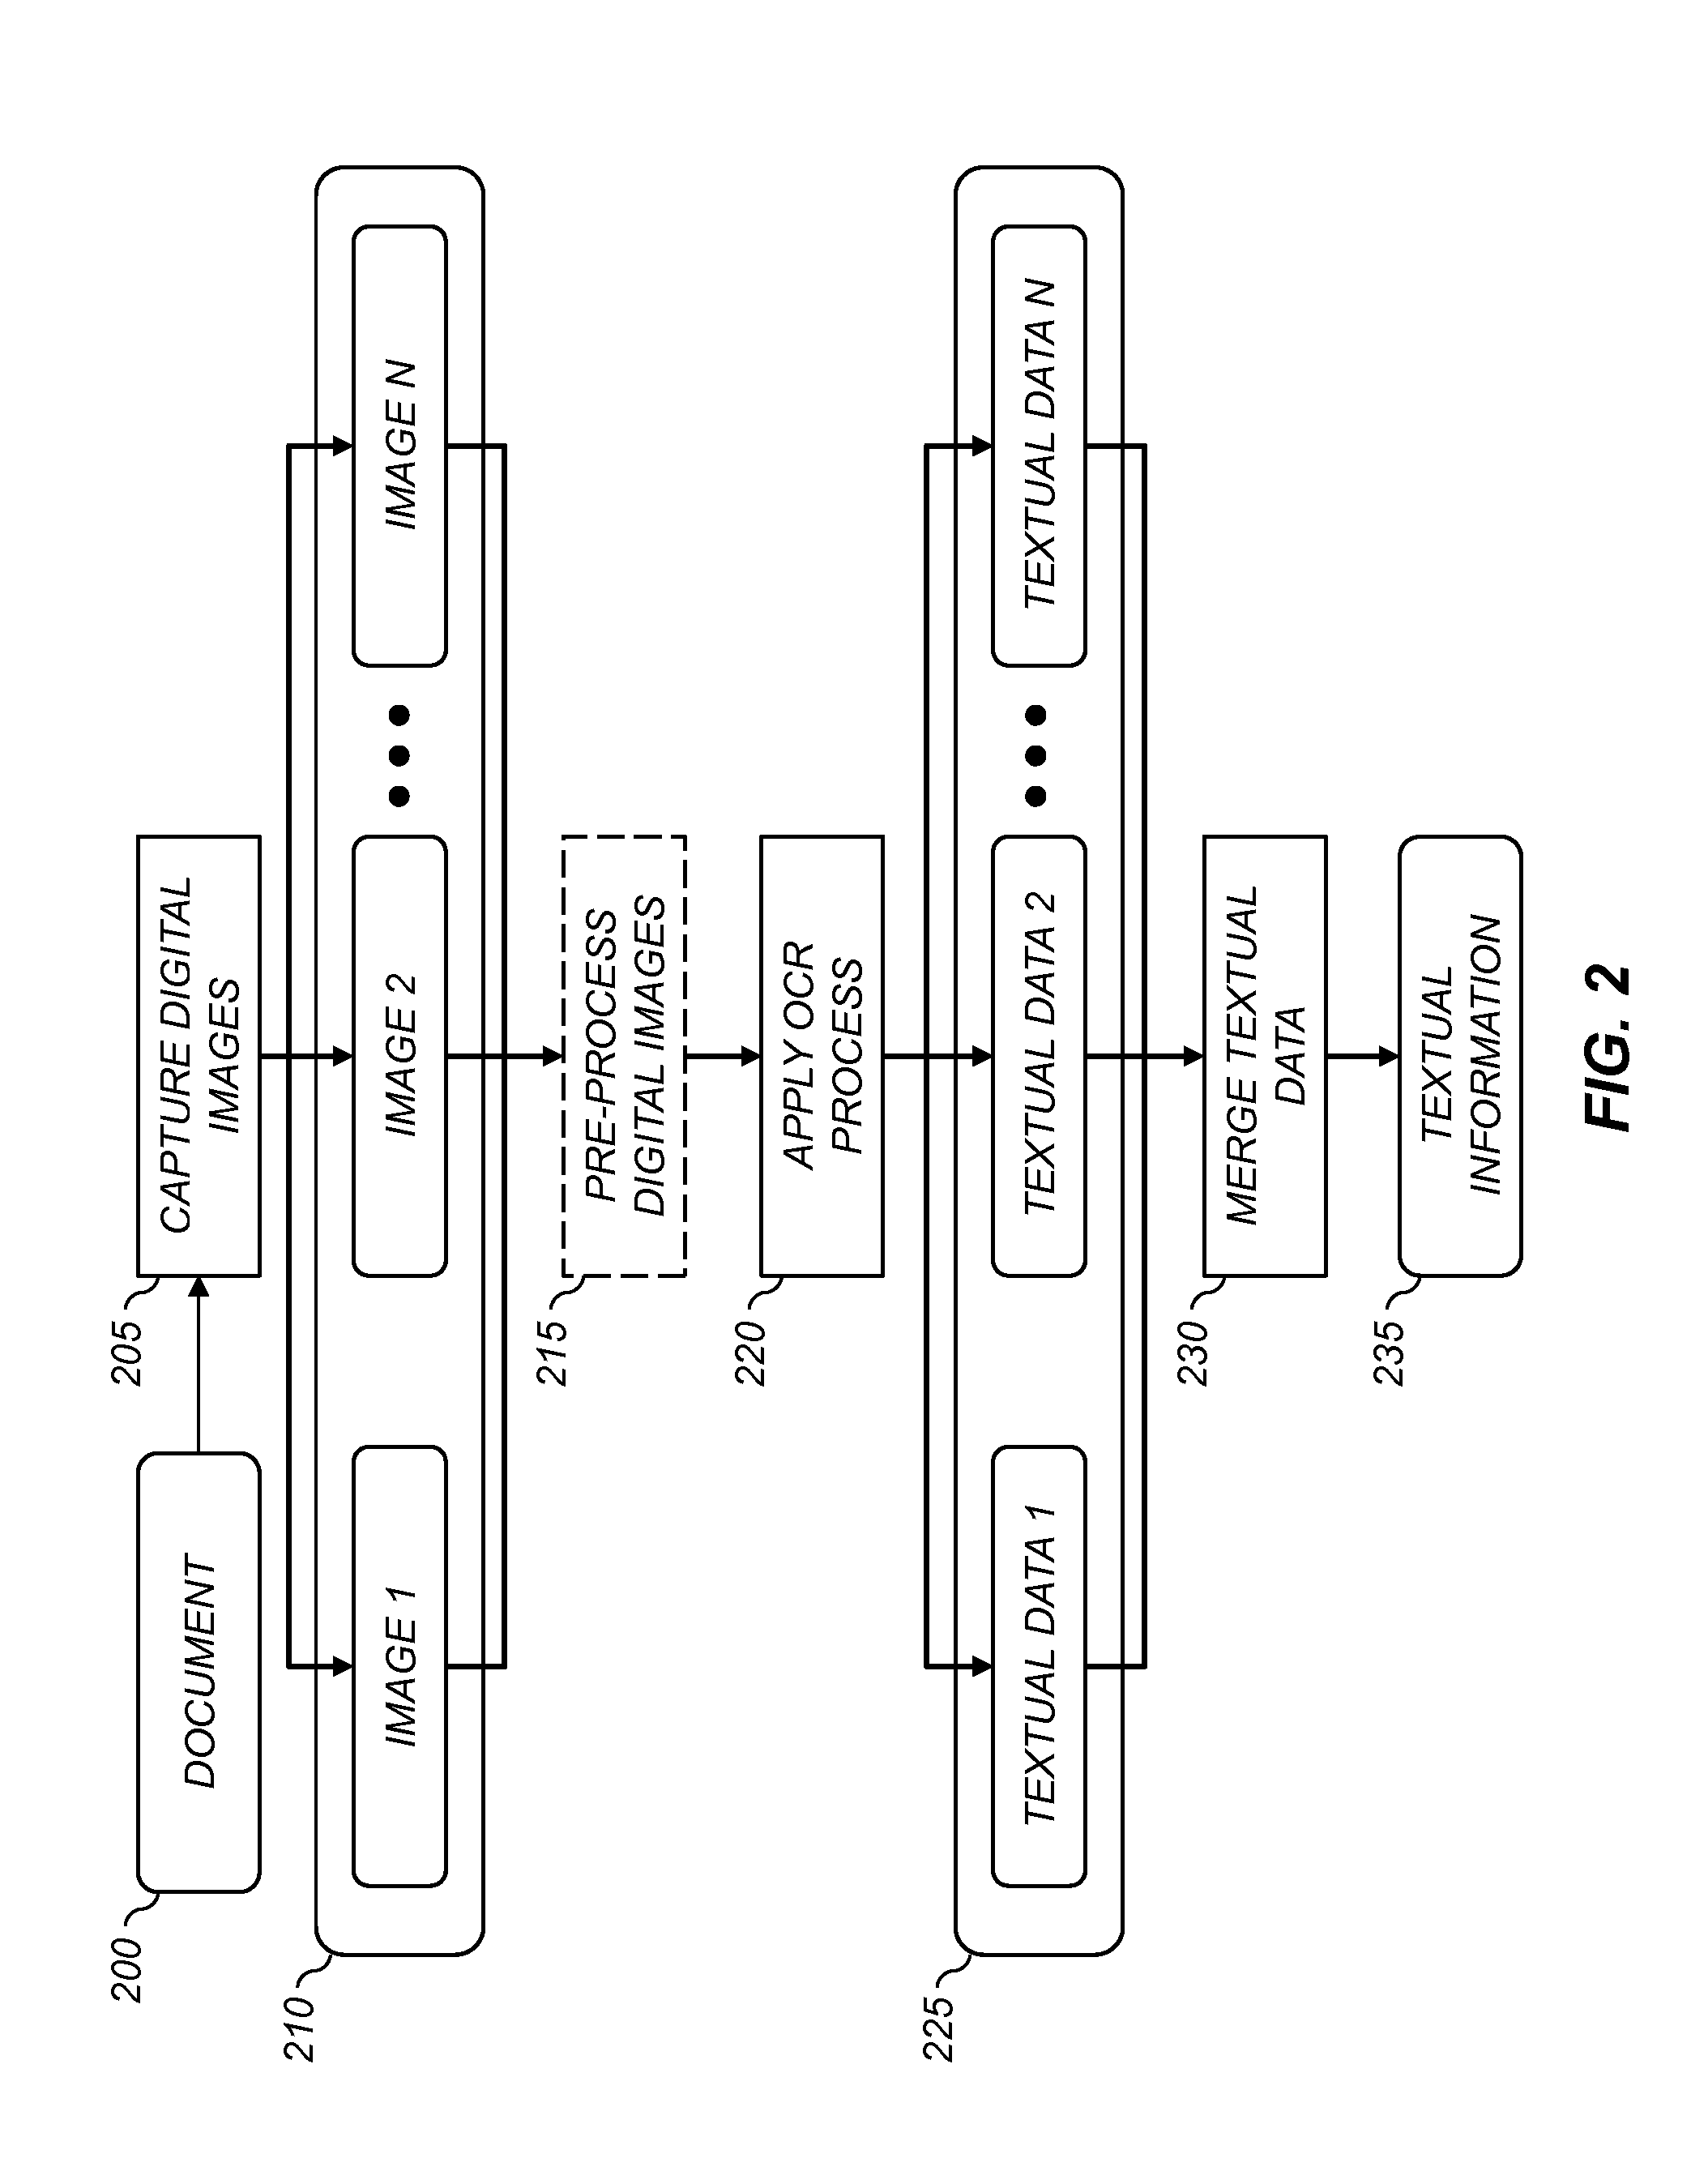 Textual information extraction method using multiple images